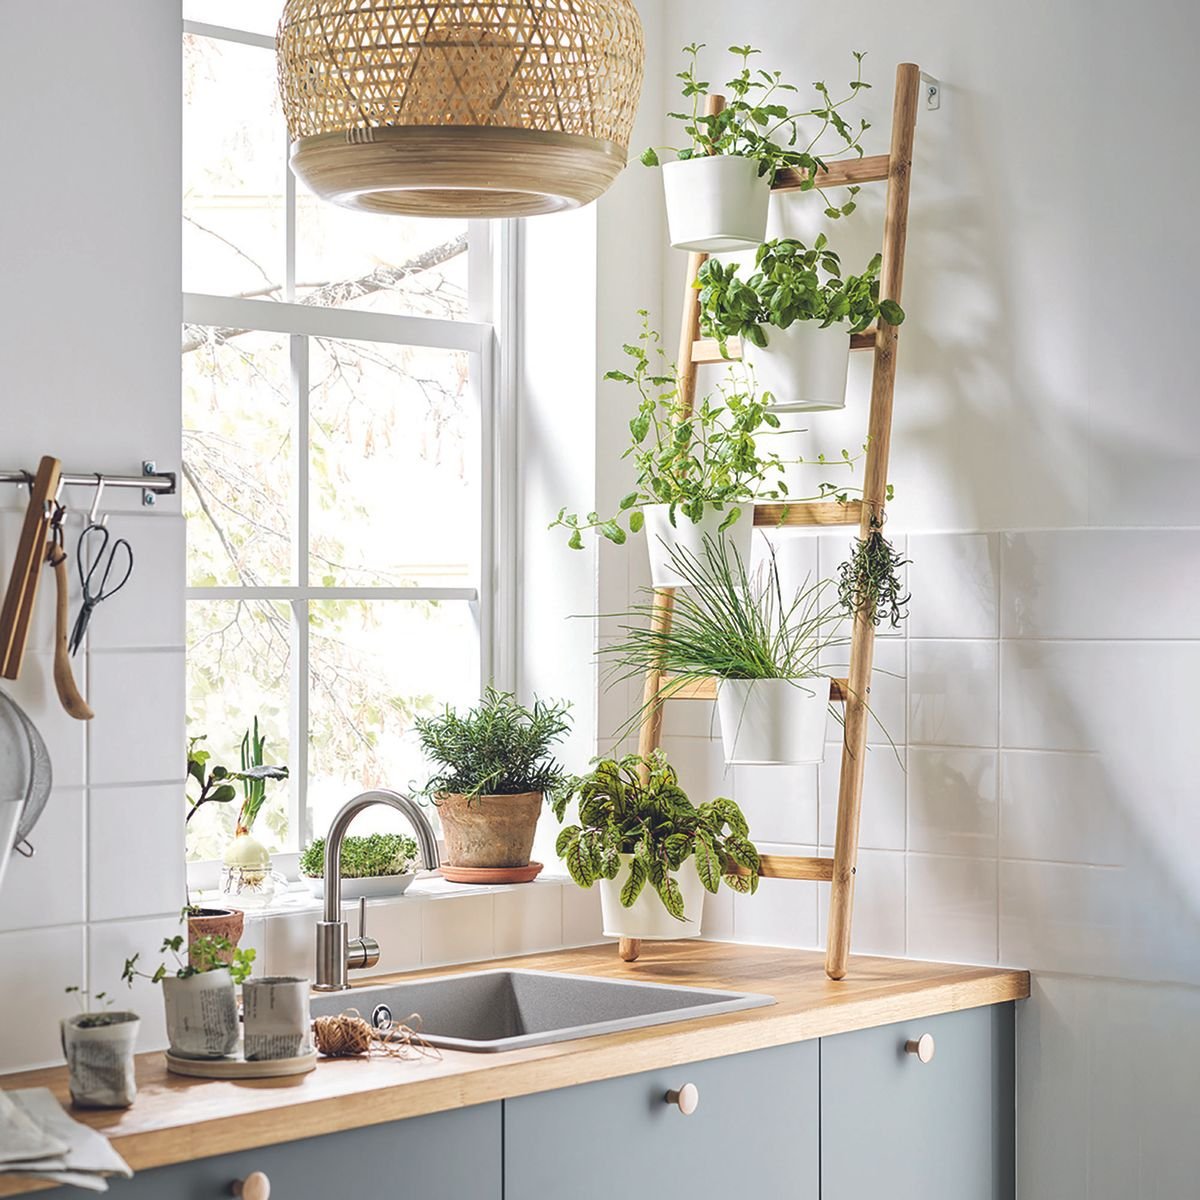 Small kitchen ideas – 50 ways to make the most of a small space